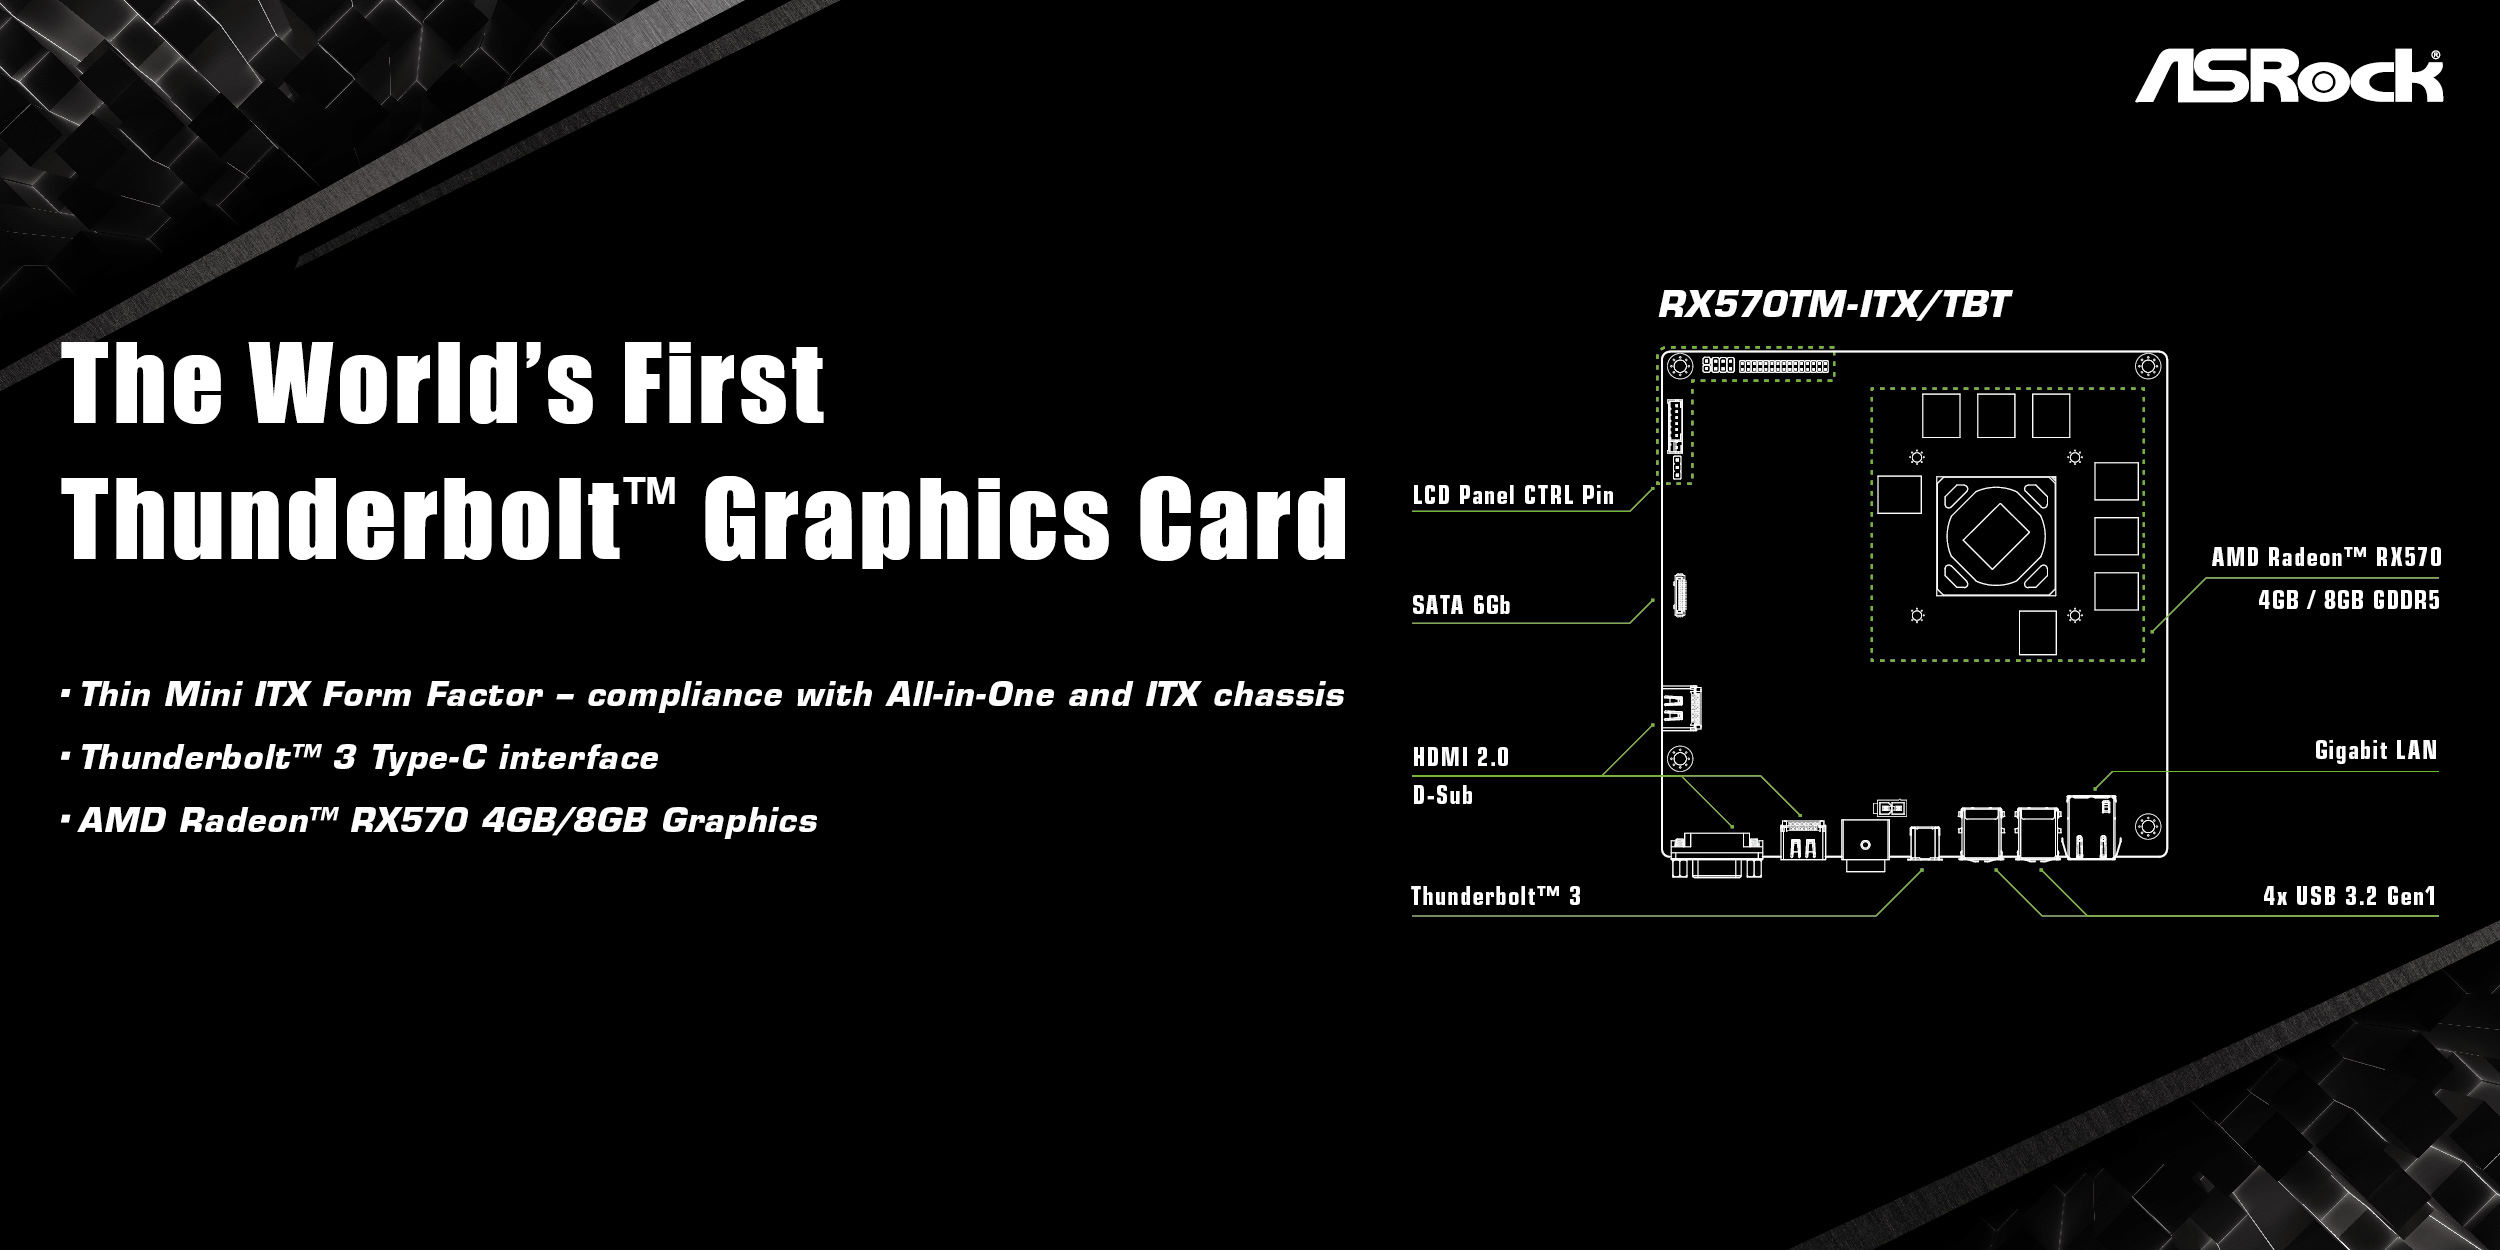 The World's First Thunderbolt Graphics Card